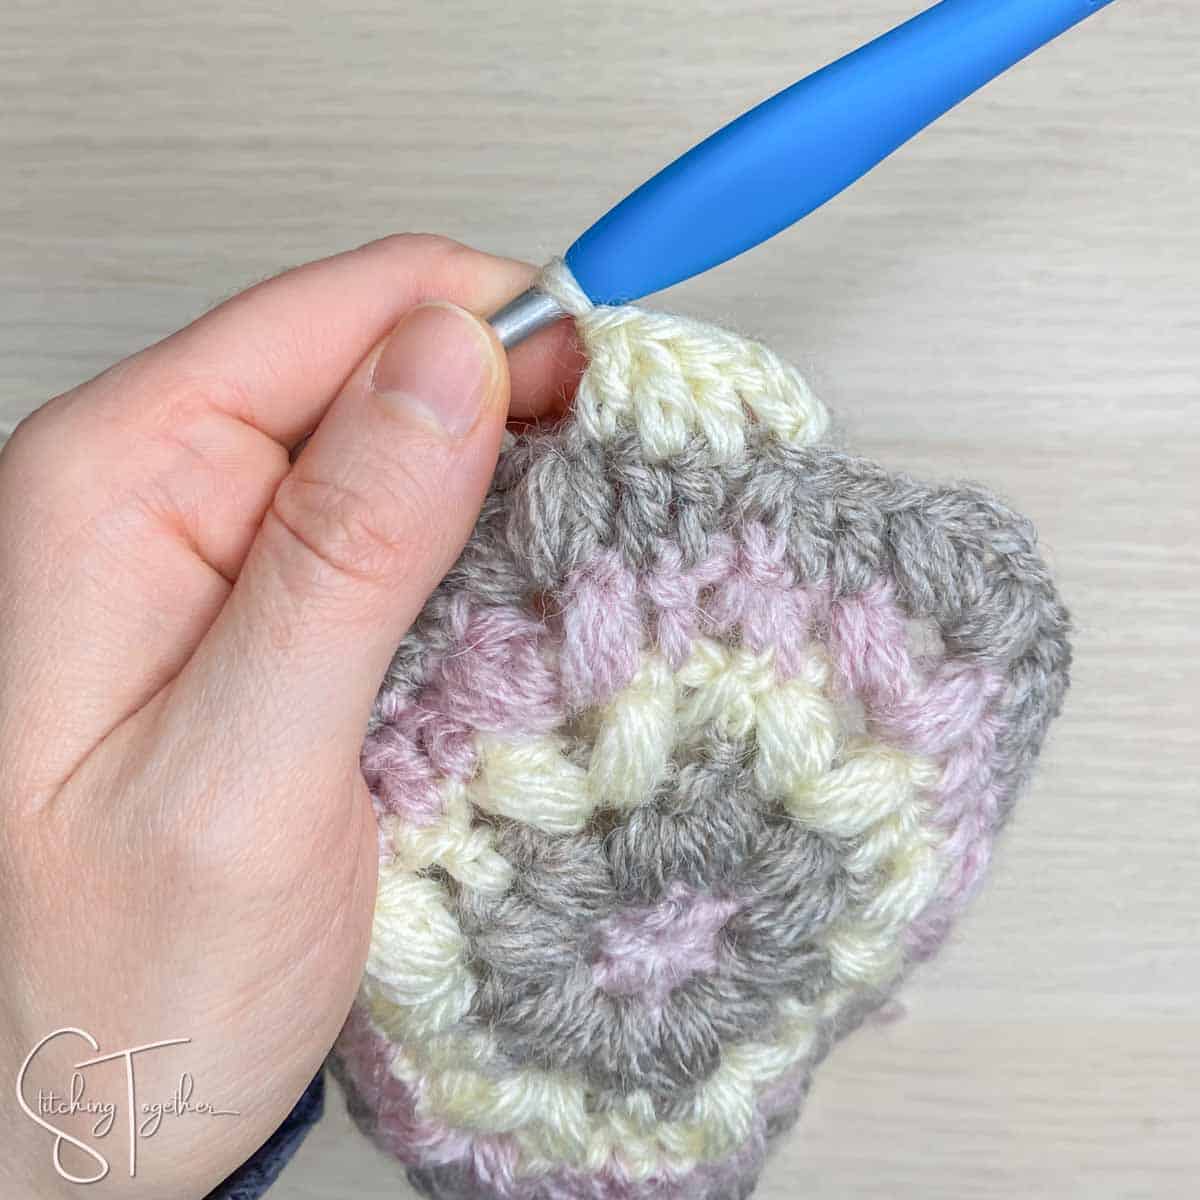 showing stitch placement for round 6 of a crochet hexagon